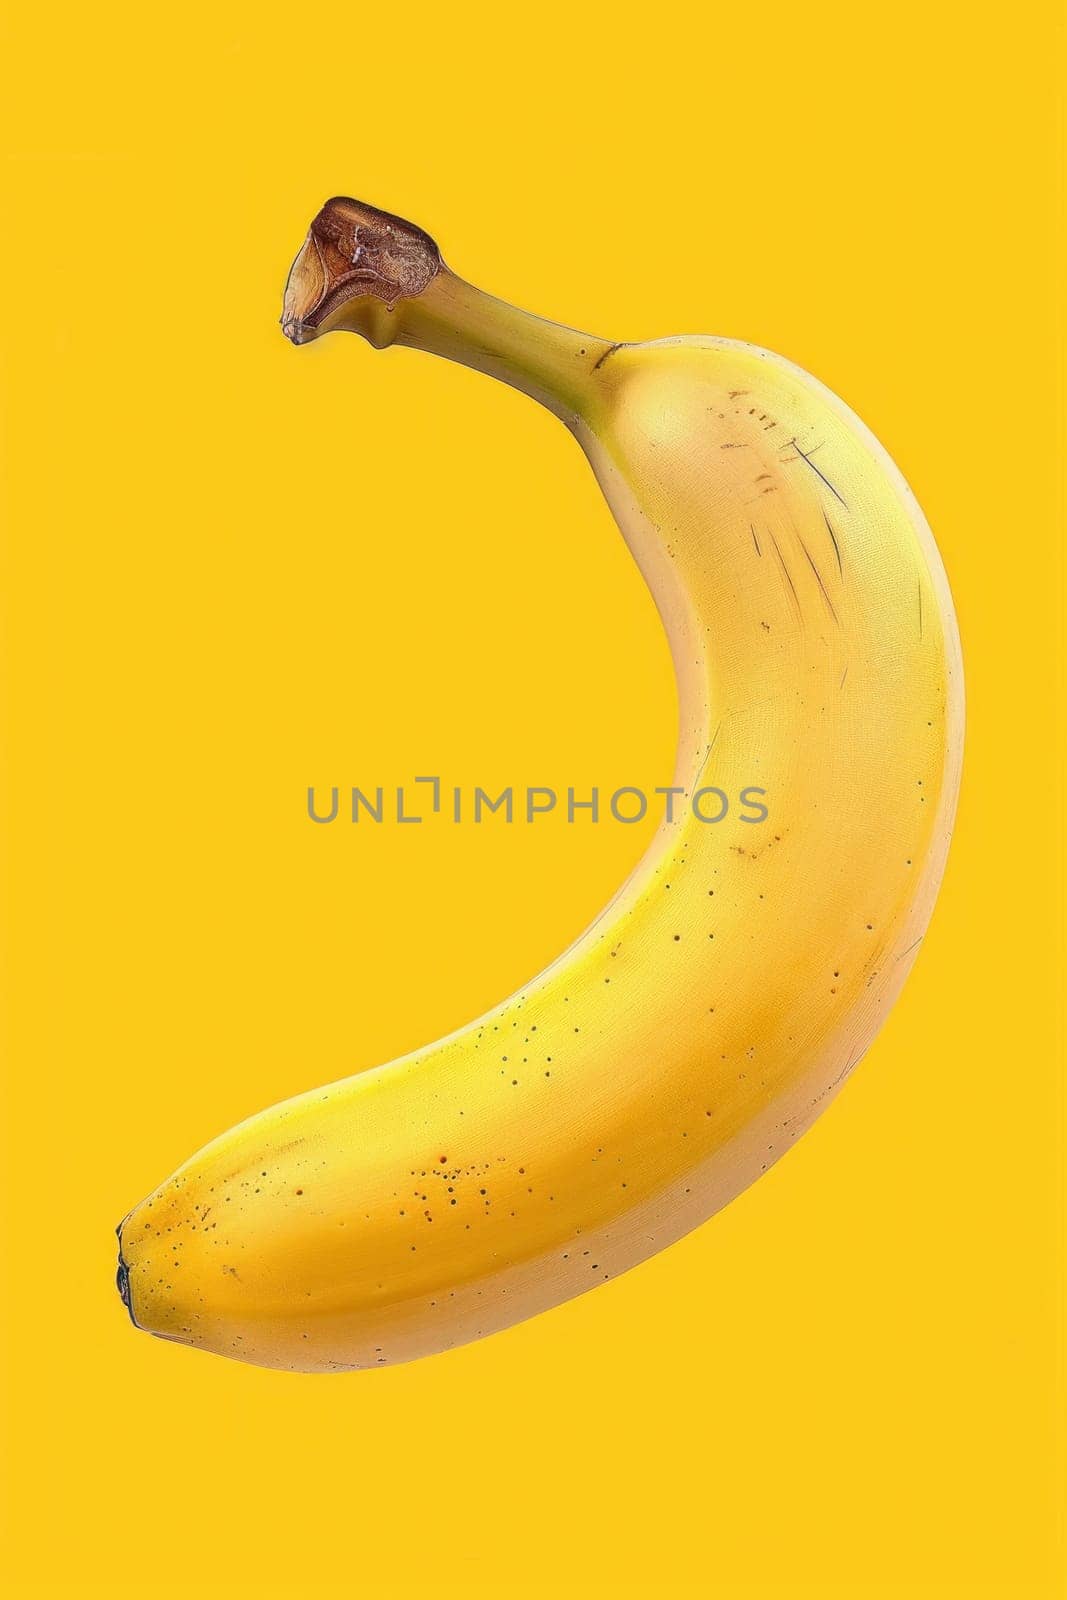 A banana with brown spots on it by golfmerrymaker